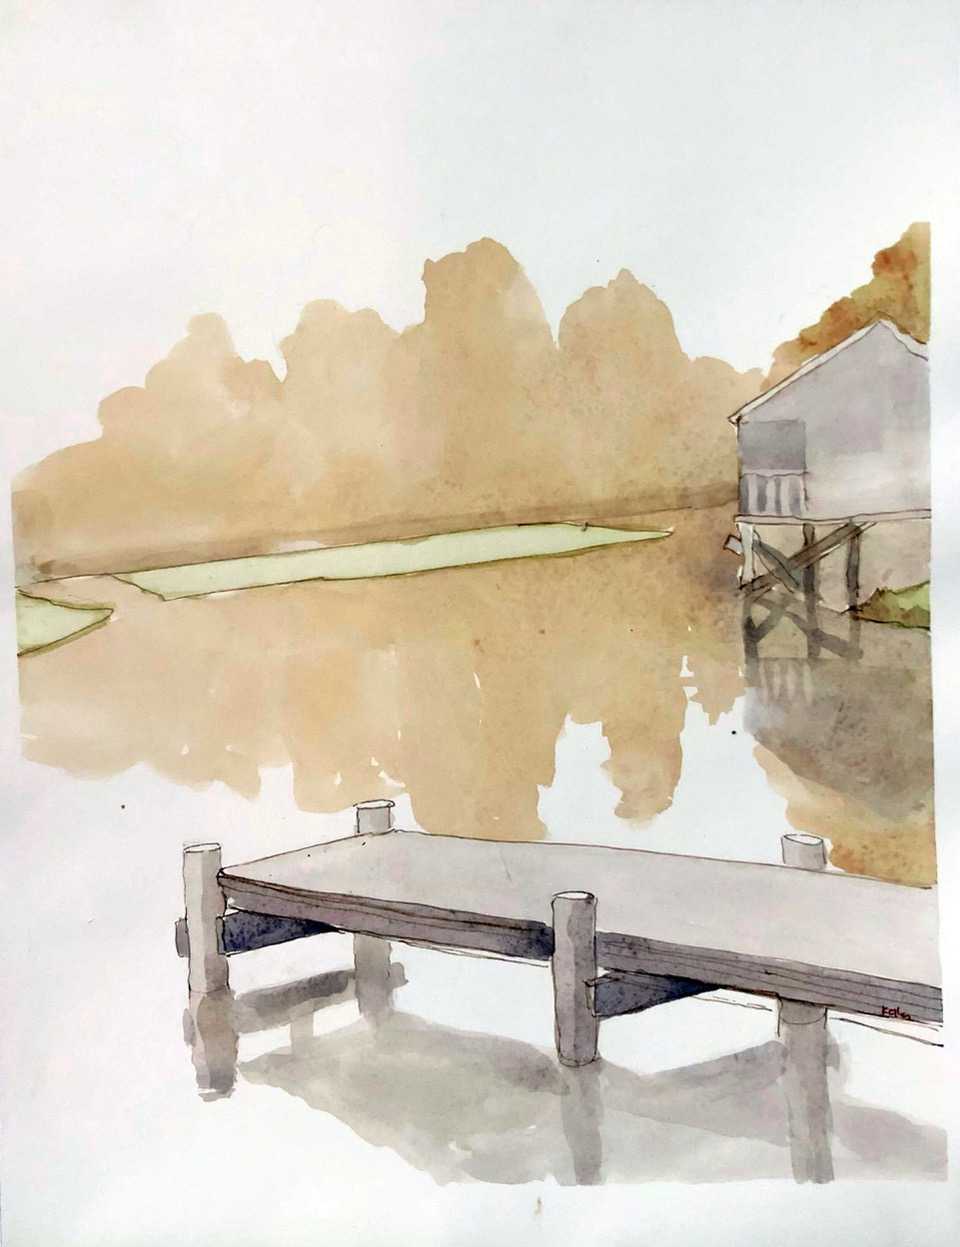 Kathryn-Keller-Lake-Fausse-Point-3.10.2020-2020-Watercolor-on-Paper-16-by-12-inches.jpg